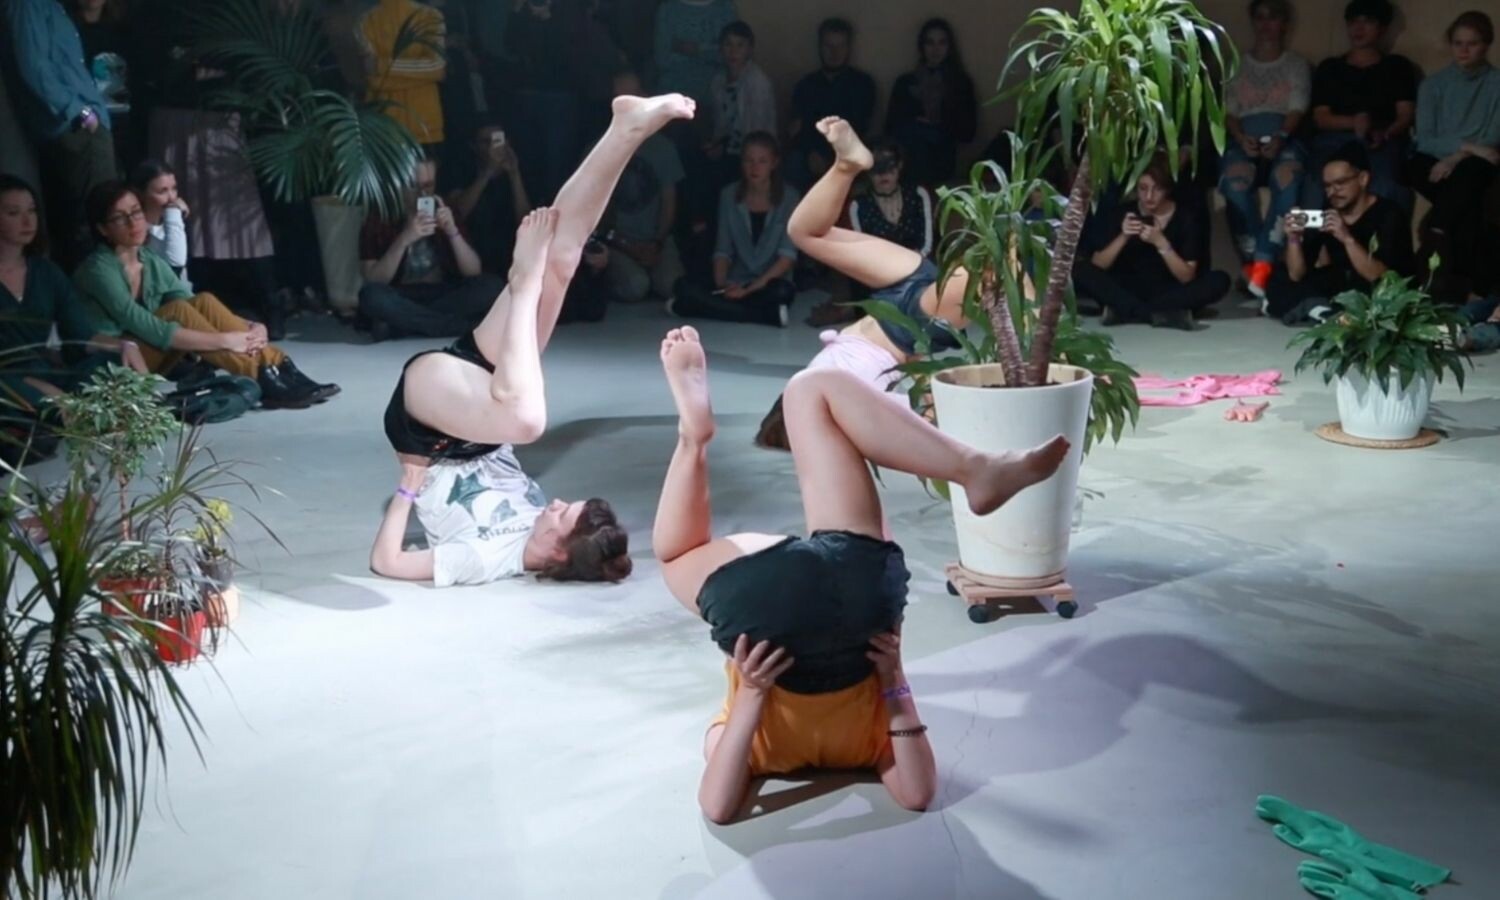 Three actors with their heads and shoulders on the ground and legs up. They're surrounded by the audience and some plants.